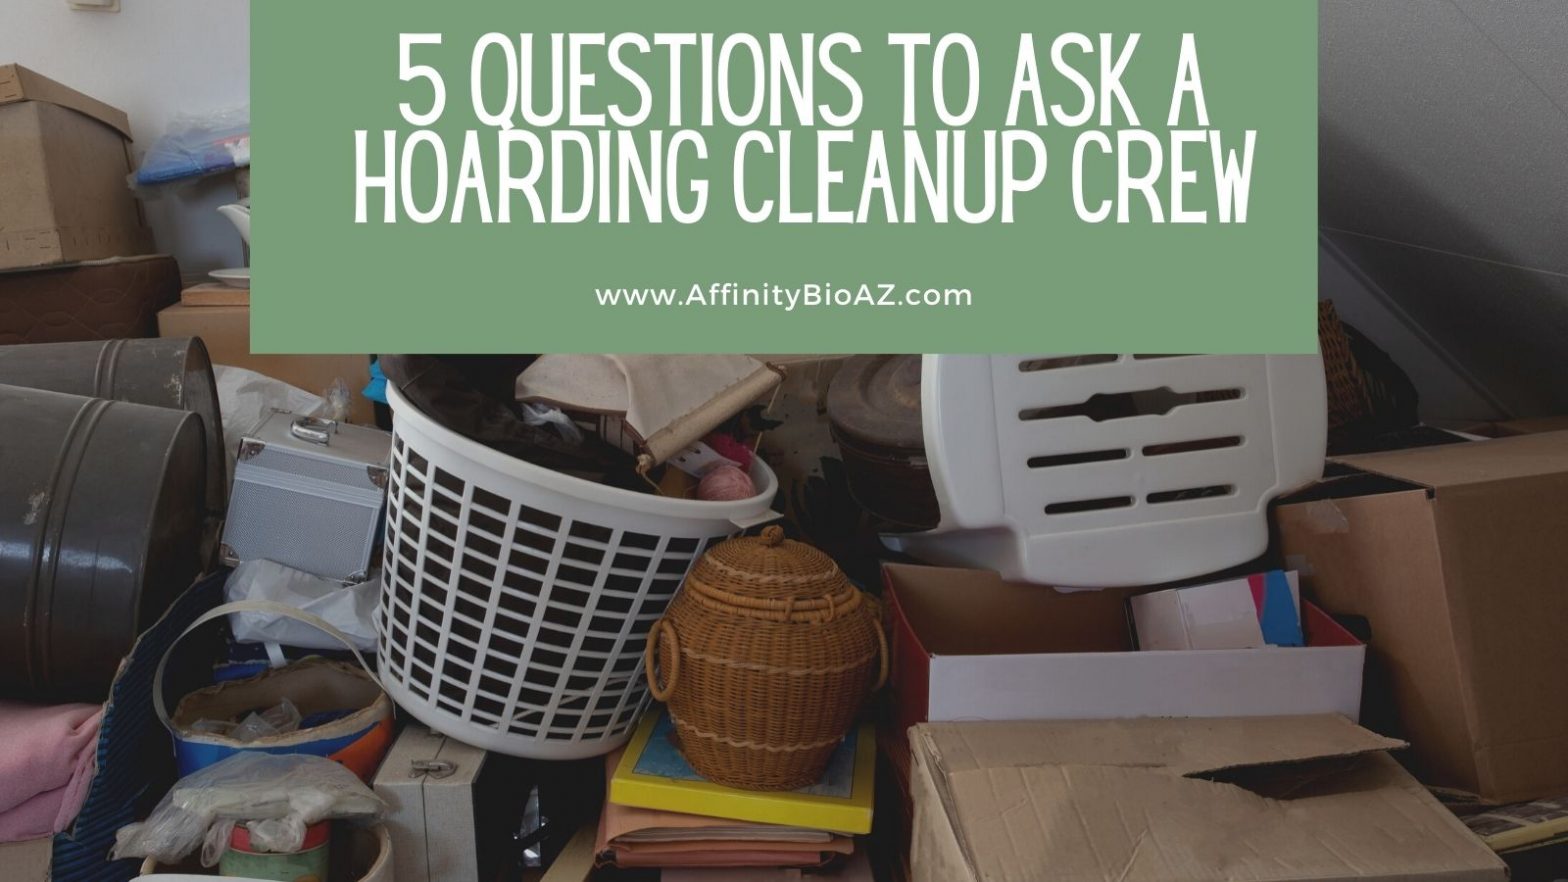 5 Questions to Ask a Hoarding Cleanup Crew